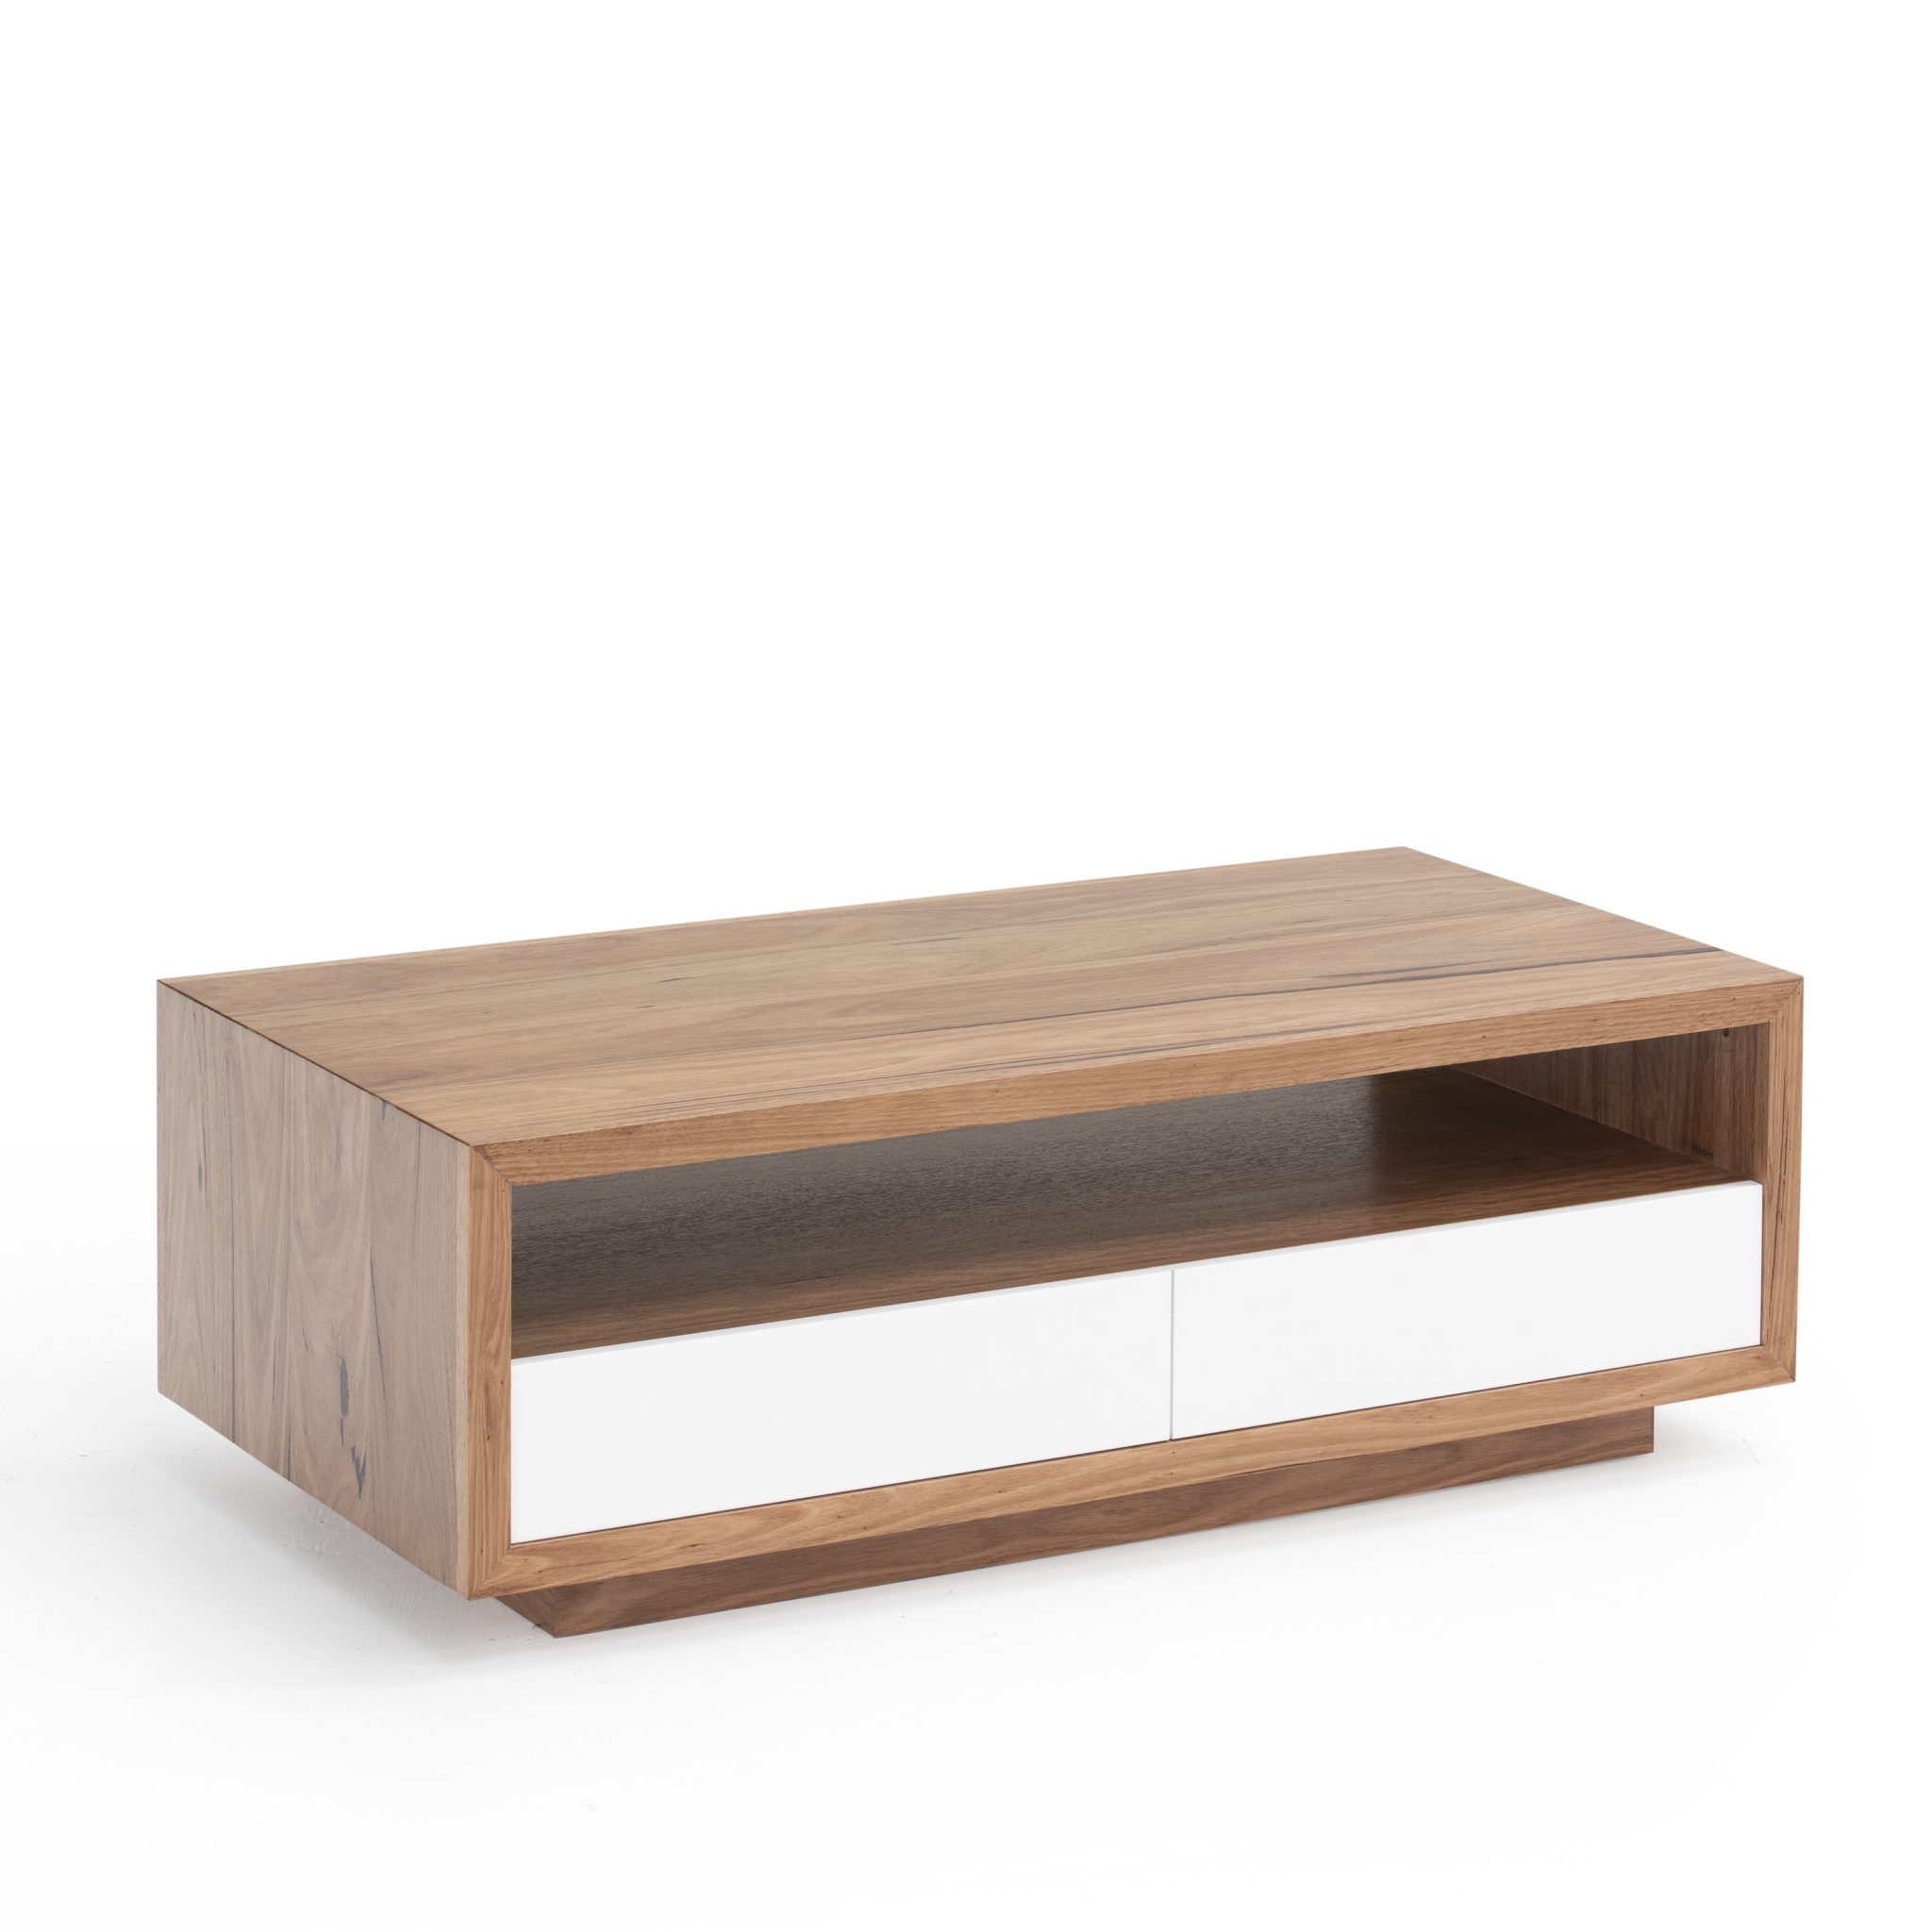 Melbourne Messmate Coffee Table Lifestyle Furniture Timber Specialists